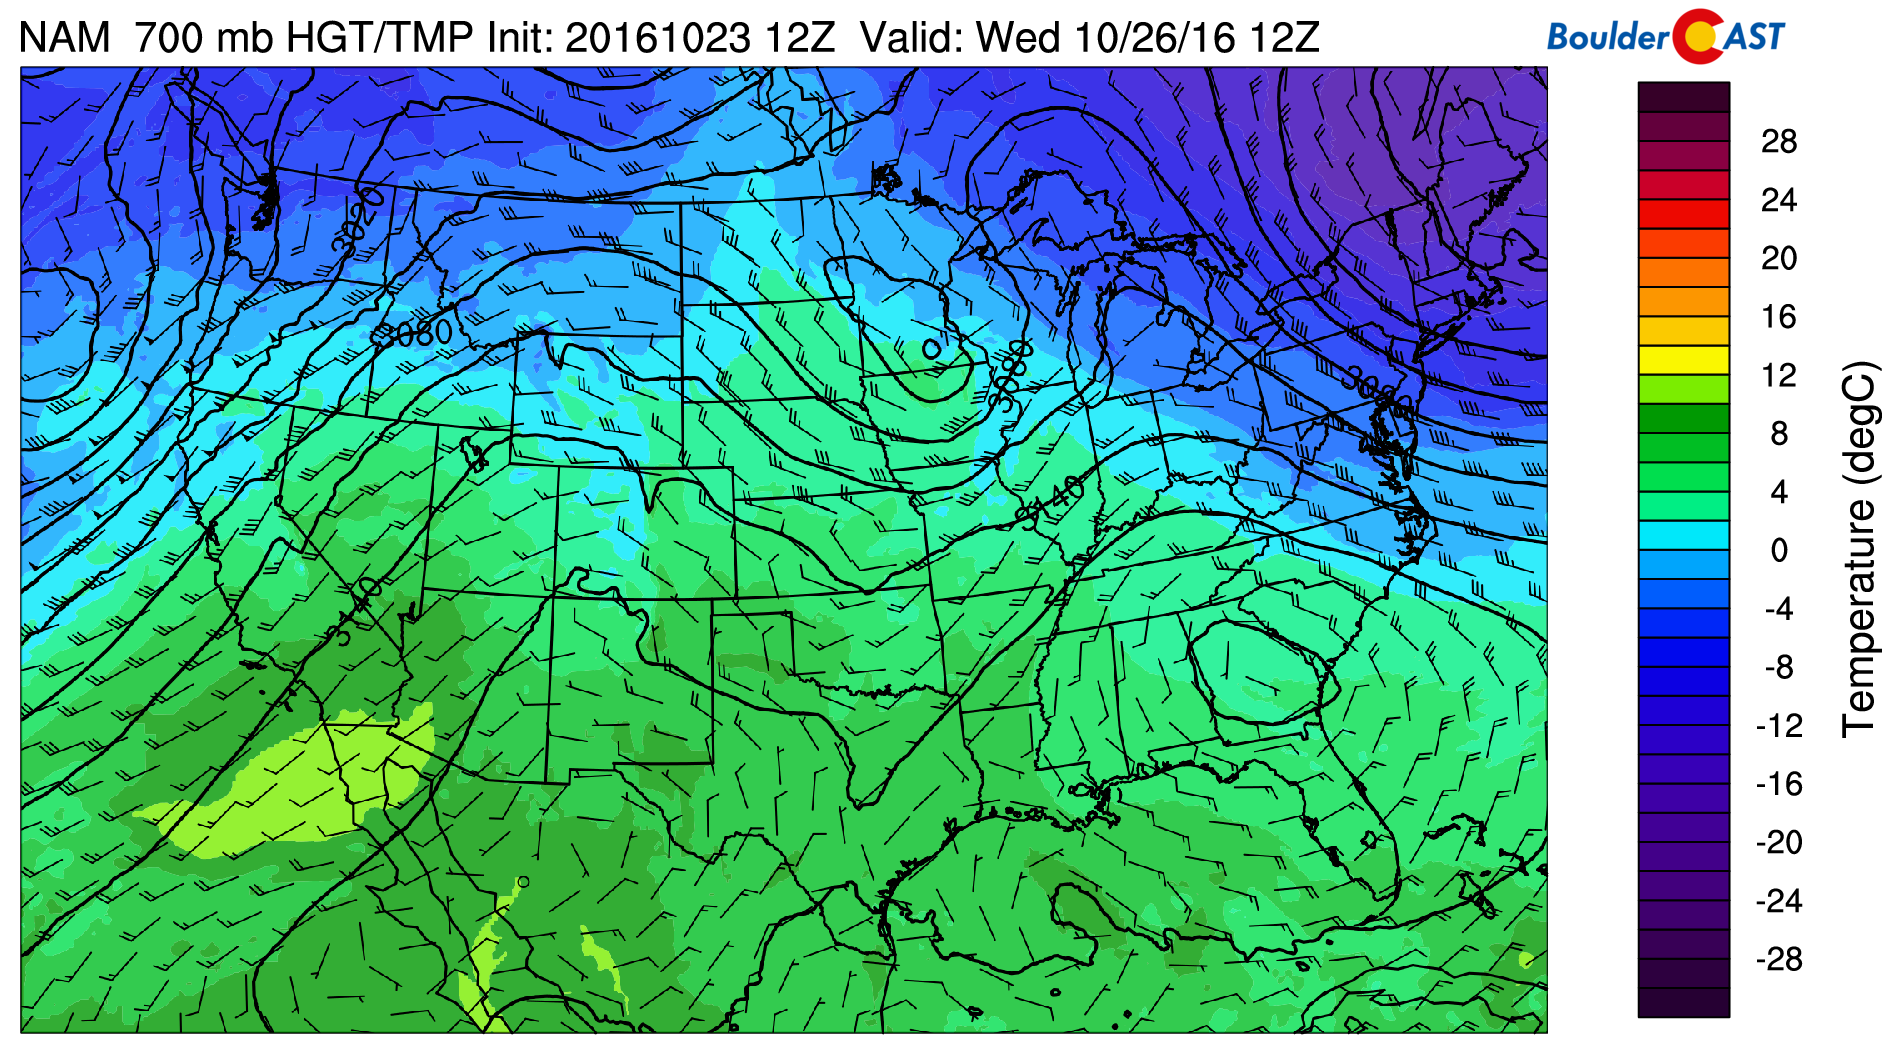 GFS 700 mb temperatures and wind for Wednesday morning, showing the cooler air and northerly flow